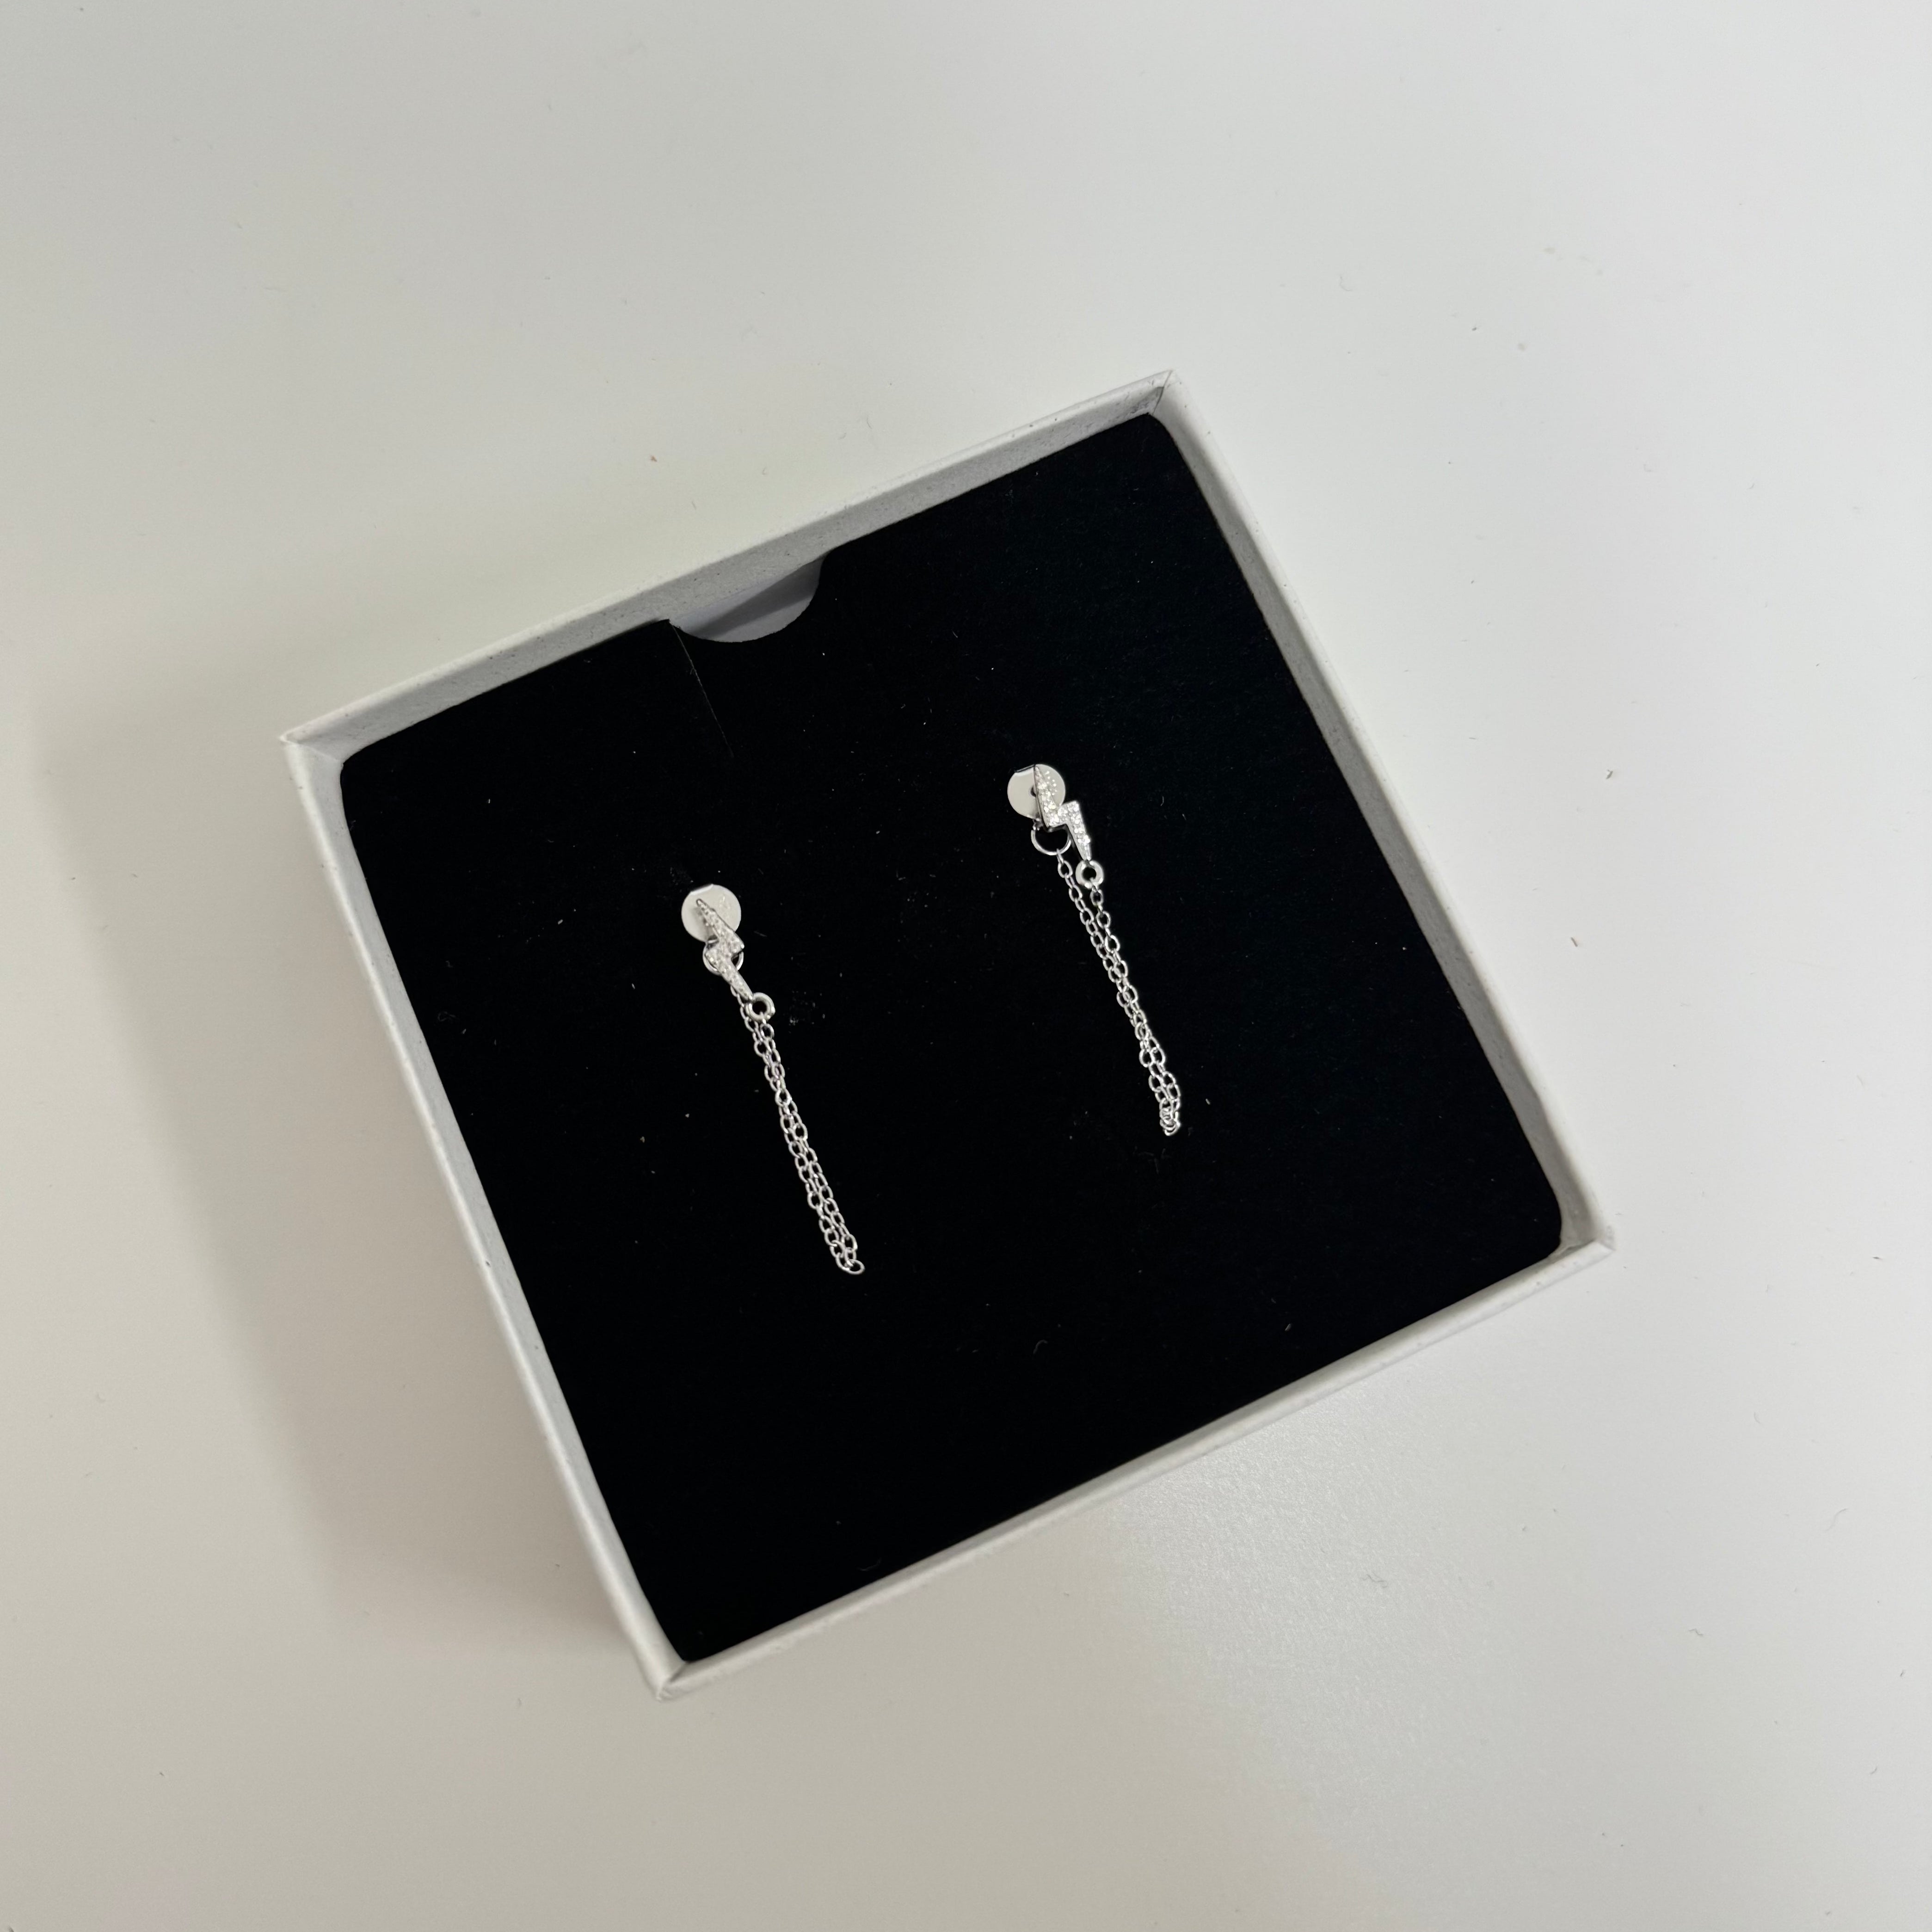 Introducing our Lightning Bolt Hang Stud Earrings. Perfect to wear on its own or in an earring stack!  High Quality 925 Sterling Silver We recommend to take Dainty Earrings out when sleeping to prevent bending.